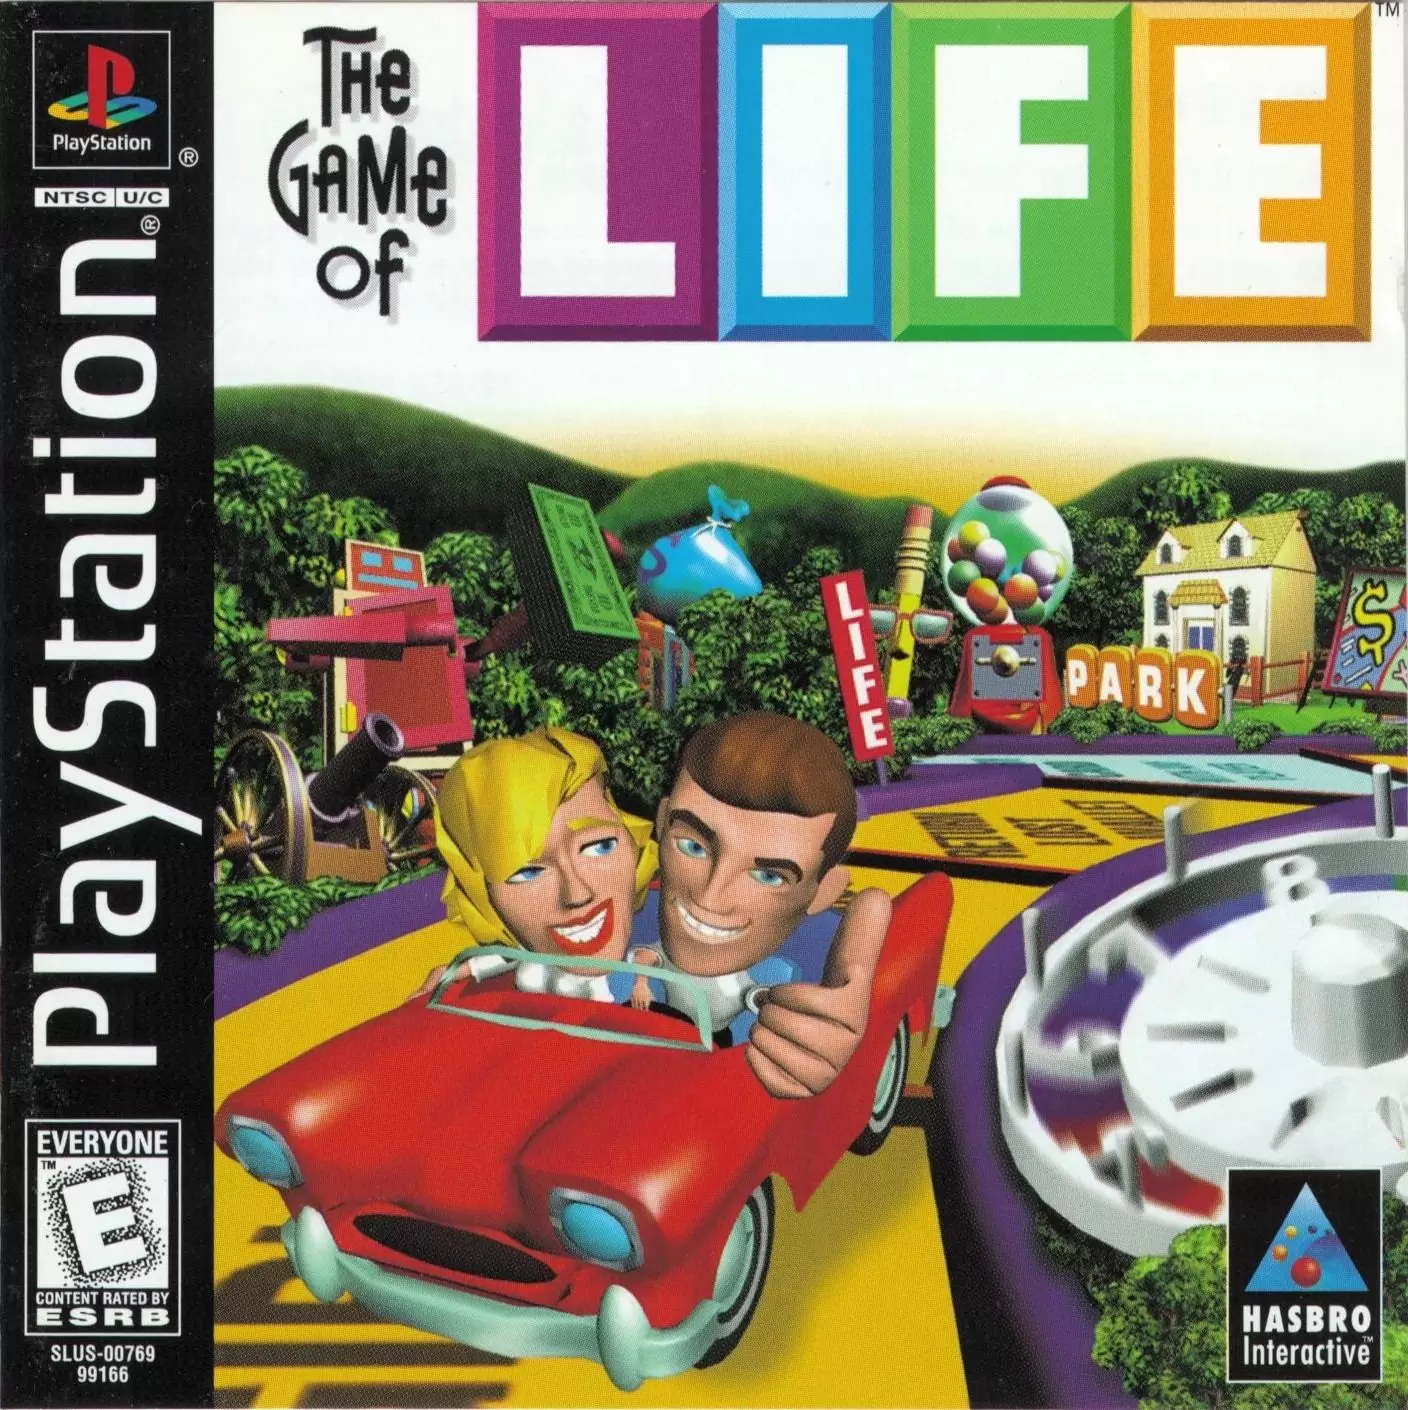 Playstation games - The Game of Life